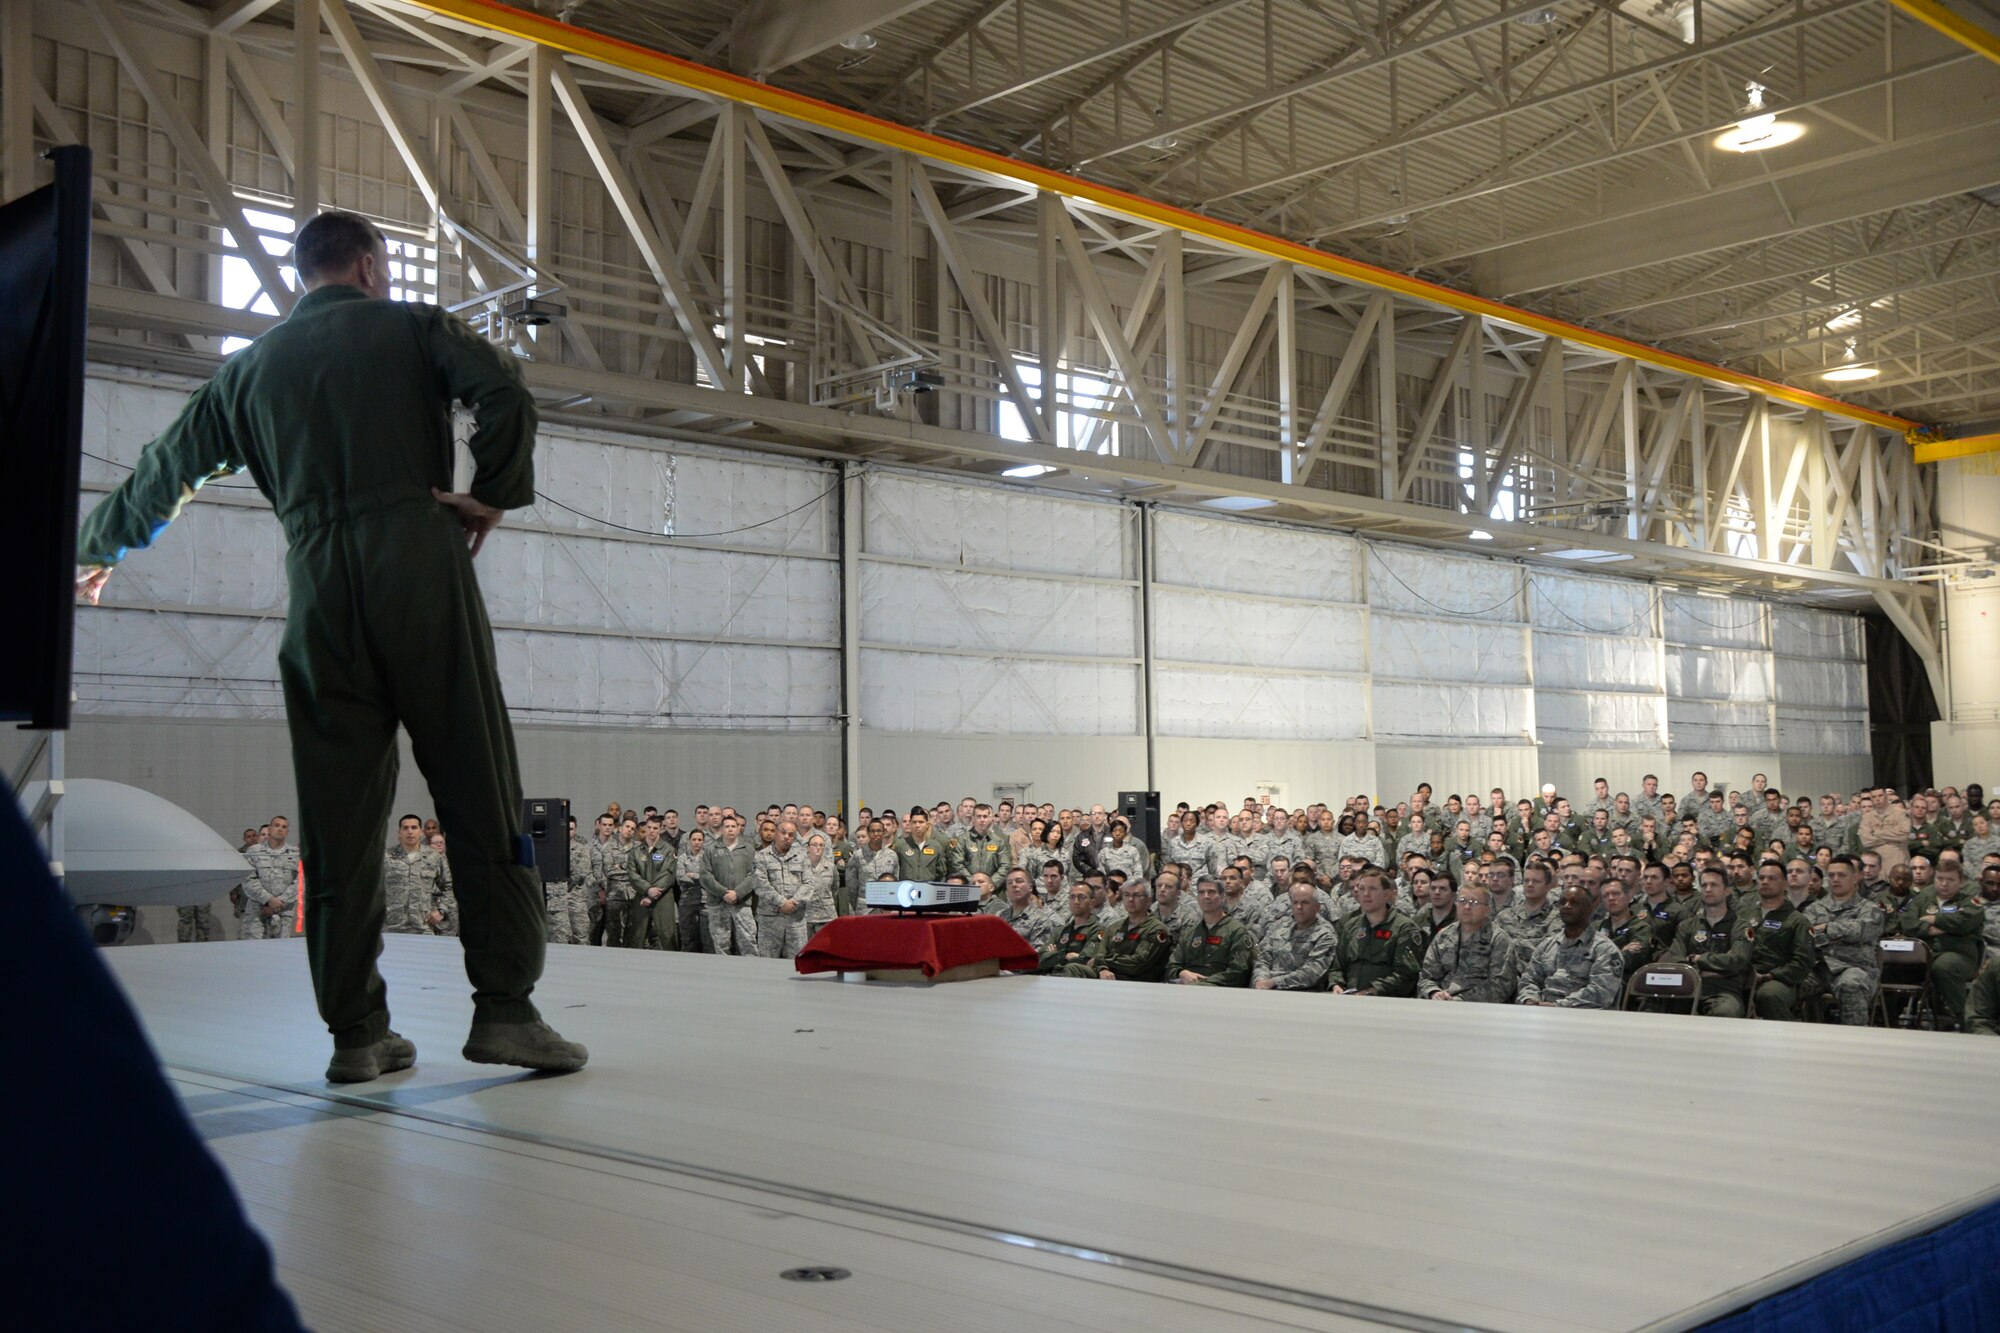 Lt. Gen. Tod D. Wolters, 12th Air Force (Air Forces Southern) commander, shares his views of today’s Air Force environment with Airmen of the 432nd Wing/432nd Air Expeditionary Wing during his all-call while on a two-day visit Jan. 13-14. Wolters discussed issues affecting Airmen such as teamwork, sexual assault prevention and suicide awareness. (U.S. Air Force photo by Airman 1st Class C.C.)